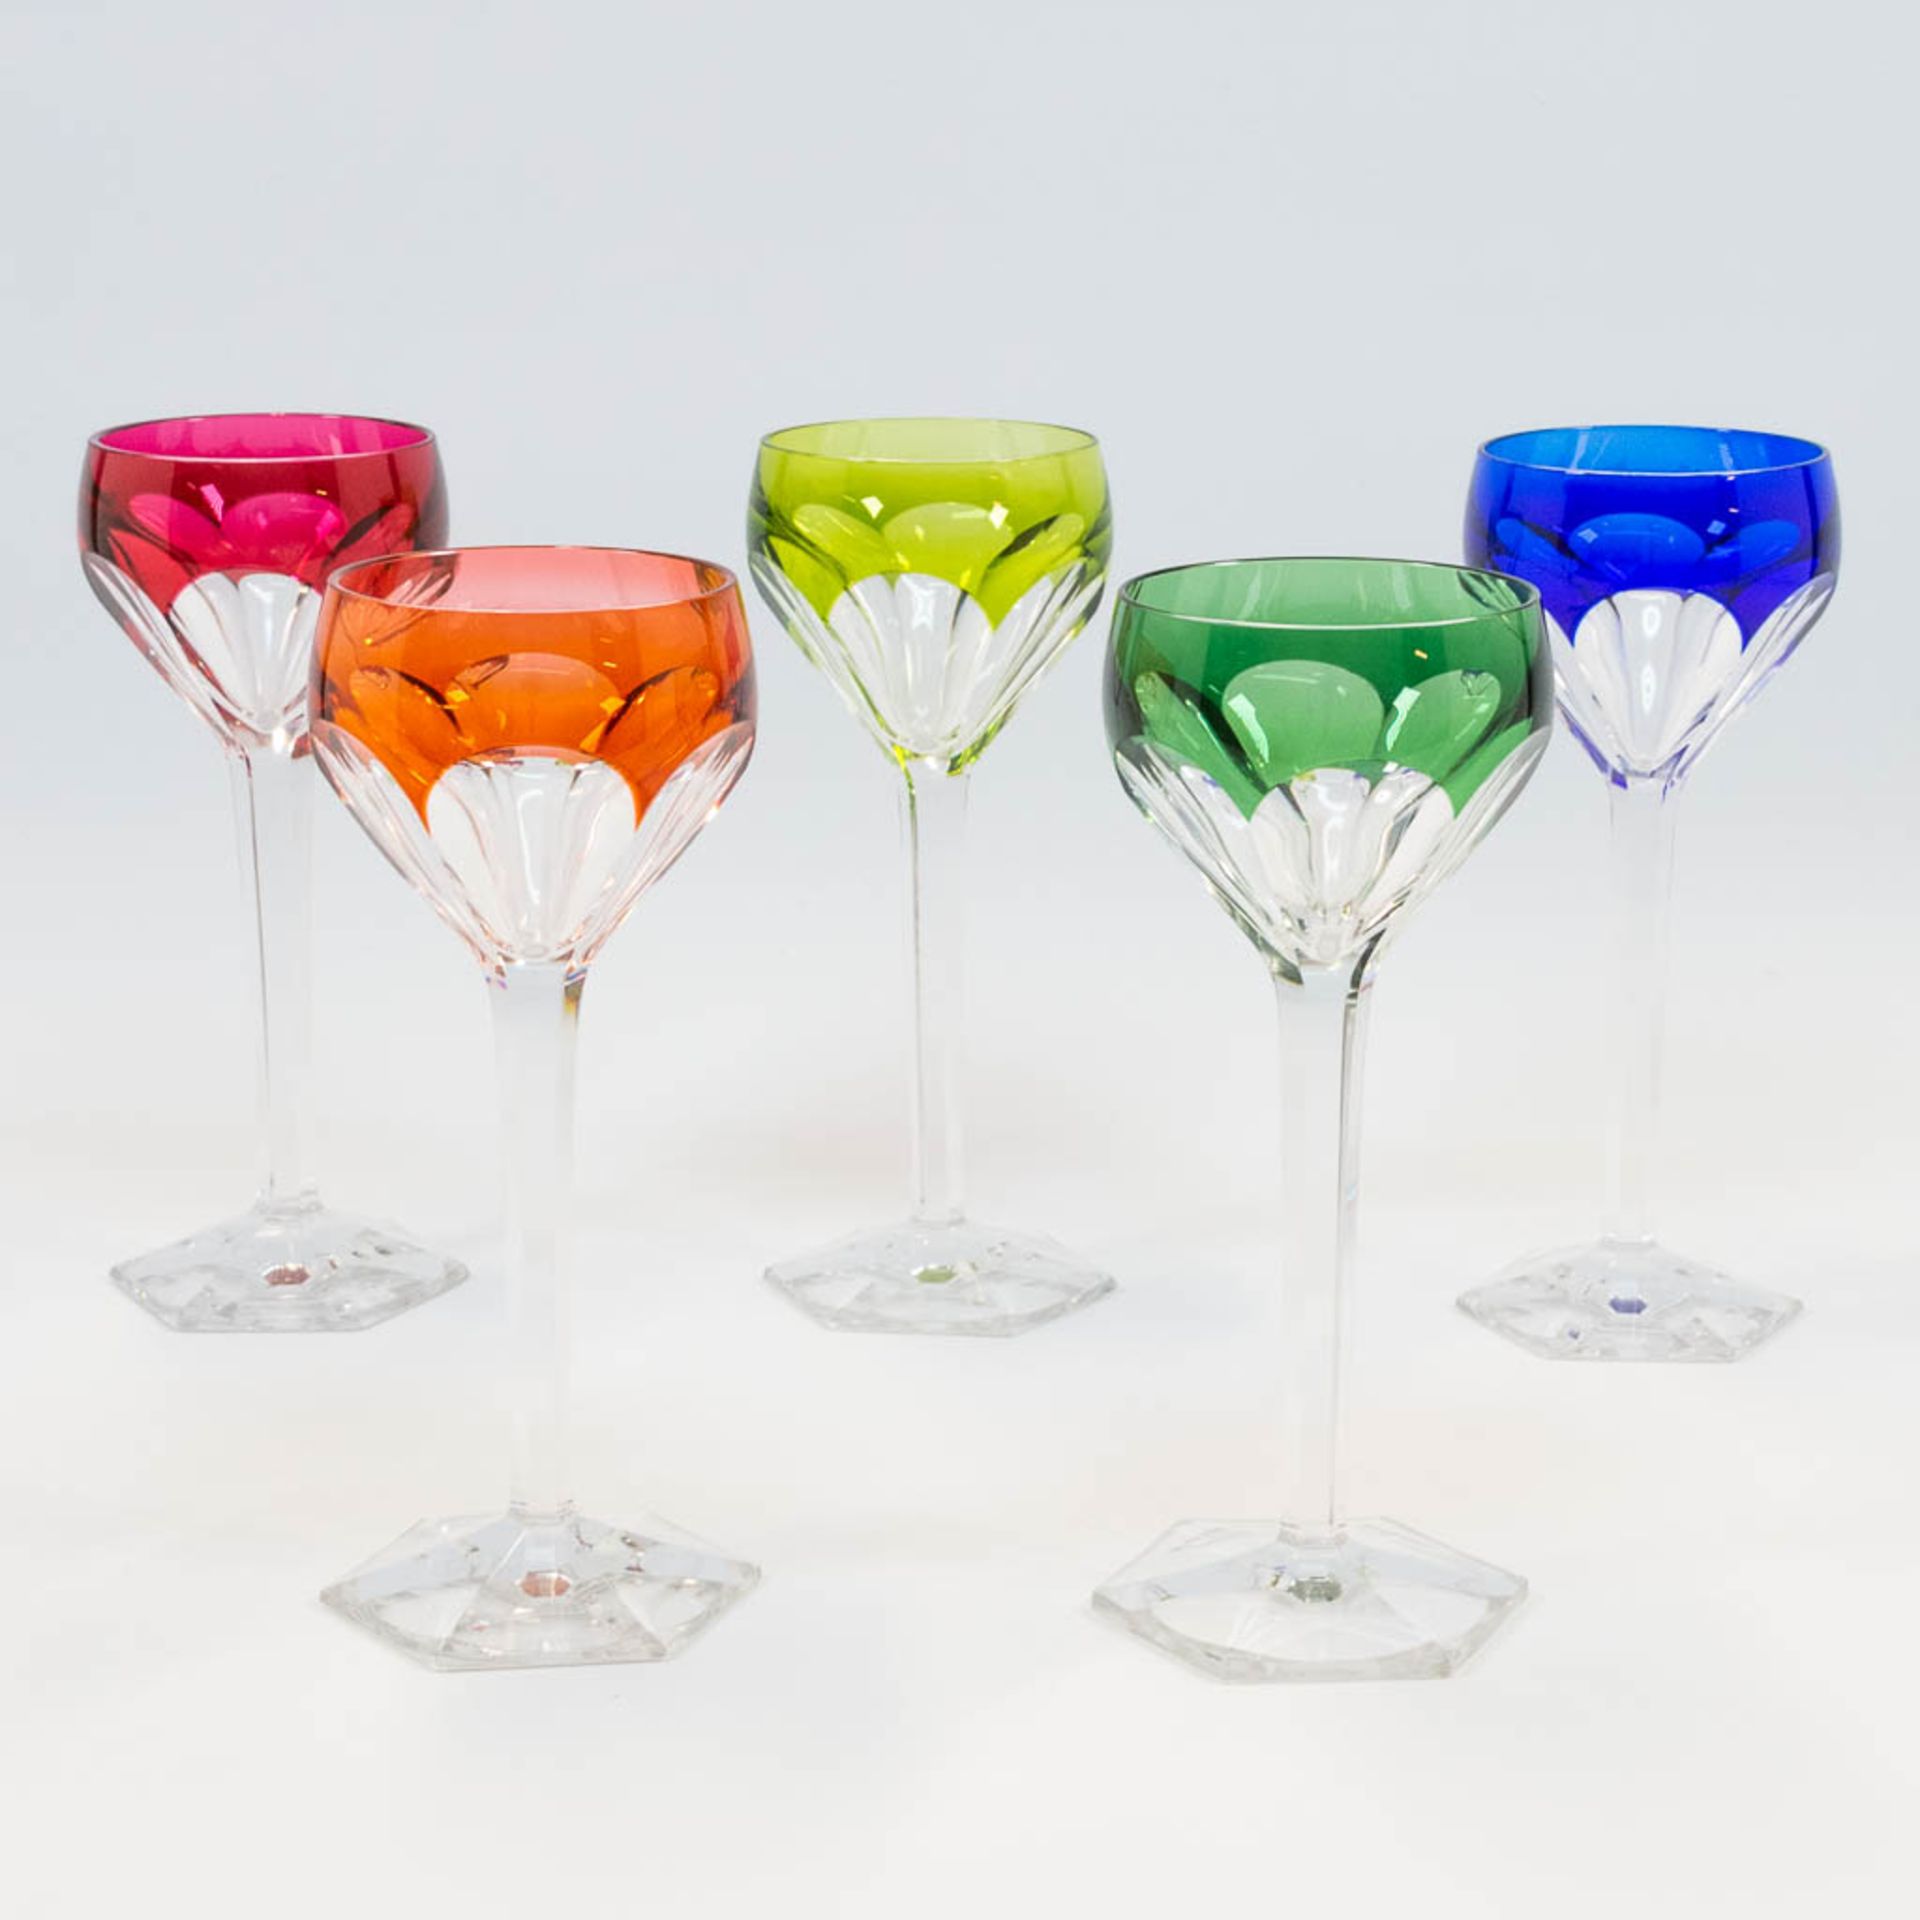 A collection of 5 cut crystal glasses in bright colours, made by Val Saint Lambert. (19 x 8 cm)